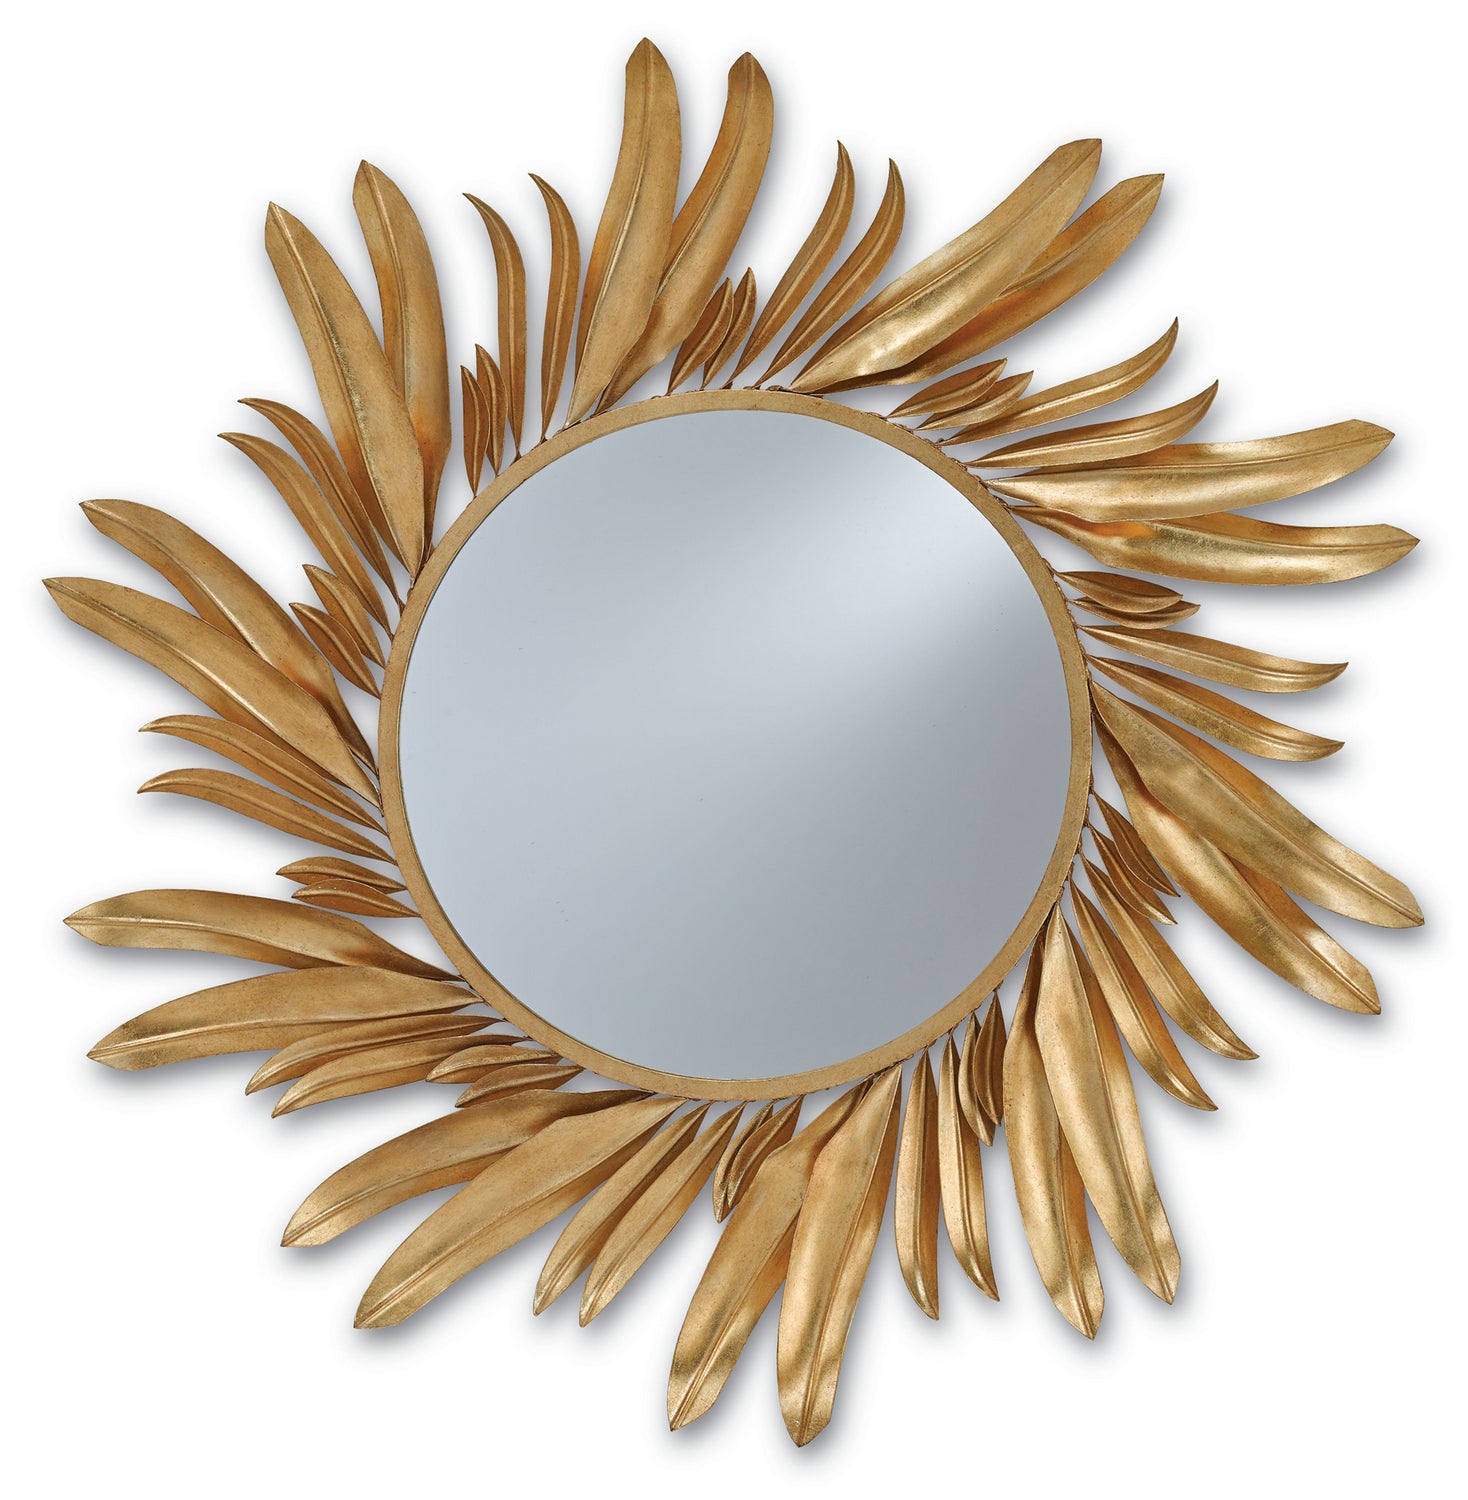 Mirror from the Folium collection in Contemporary Gold Leaf/Mirror finish